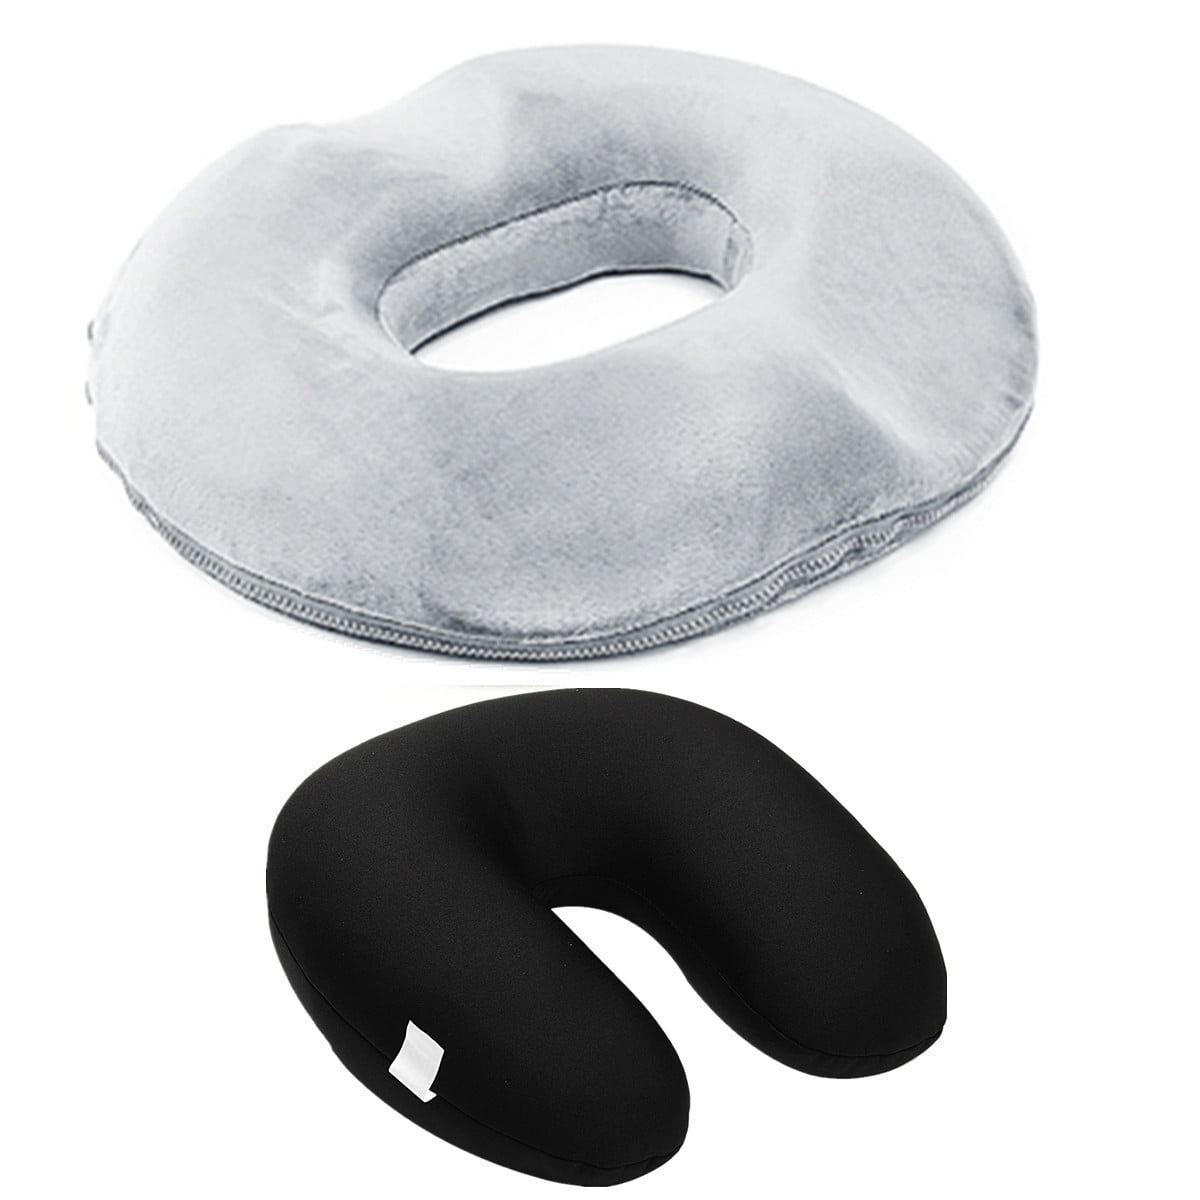 Pressure Sores Coccyx & Hip Pain Post Natal AOOPOOMemory Foam Orthopaedic Donut Seating Cushion,Reduces Sciatica Relief Tailbone Surgery